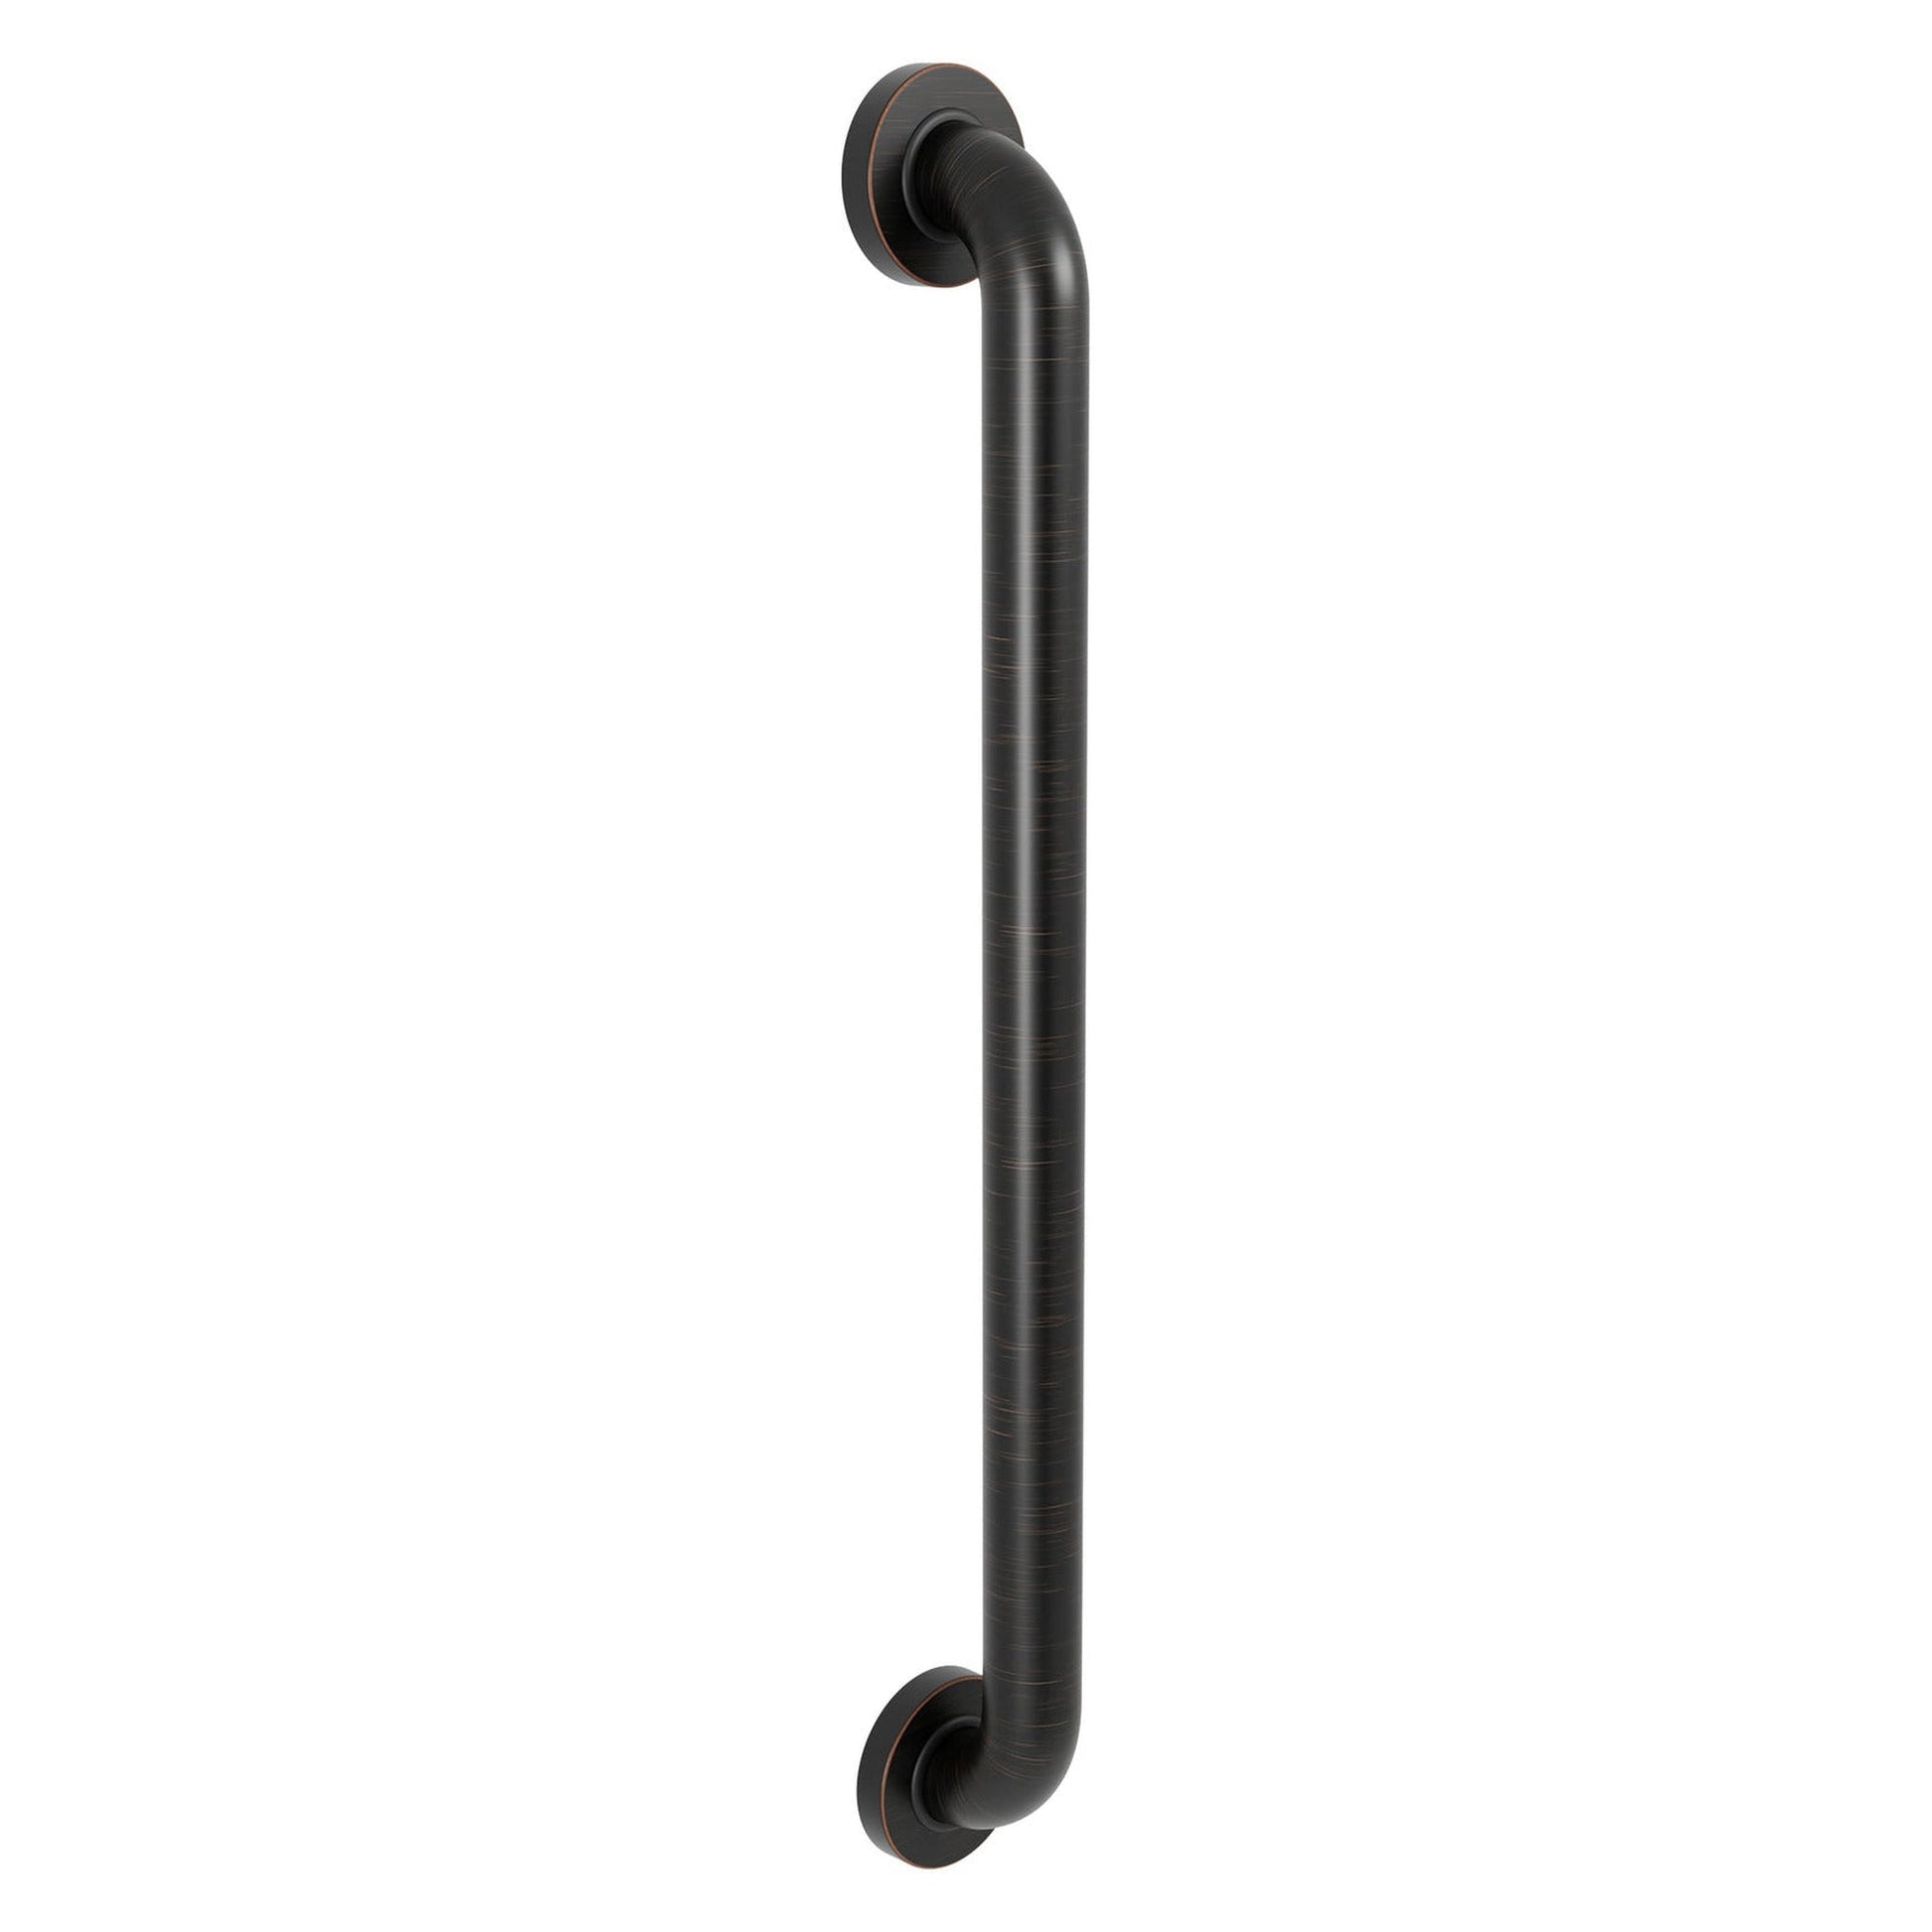 Evekare 24" x 1.5" Stainless Steel Concealed Mount Grab Bar in Oil Rubbed Bronze